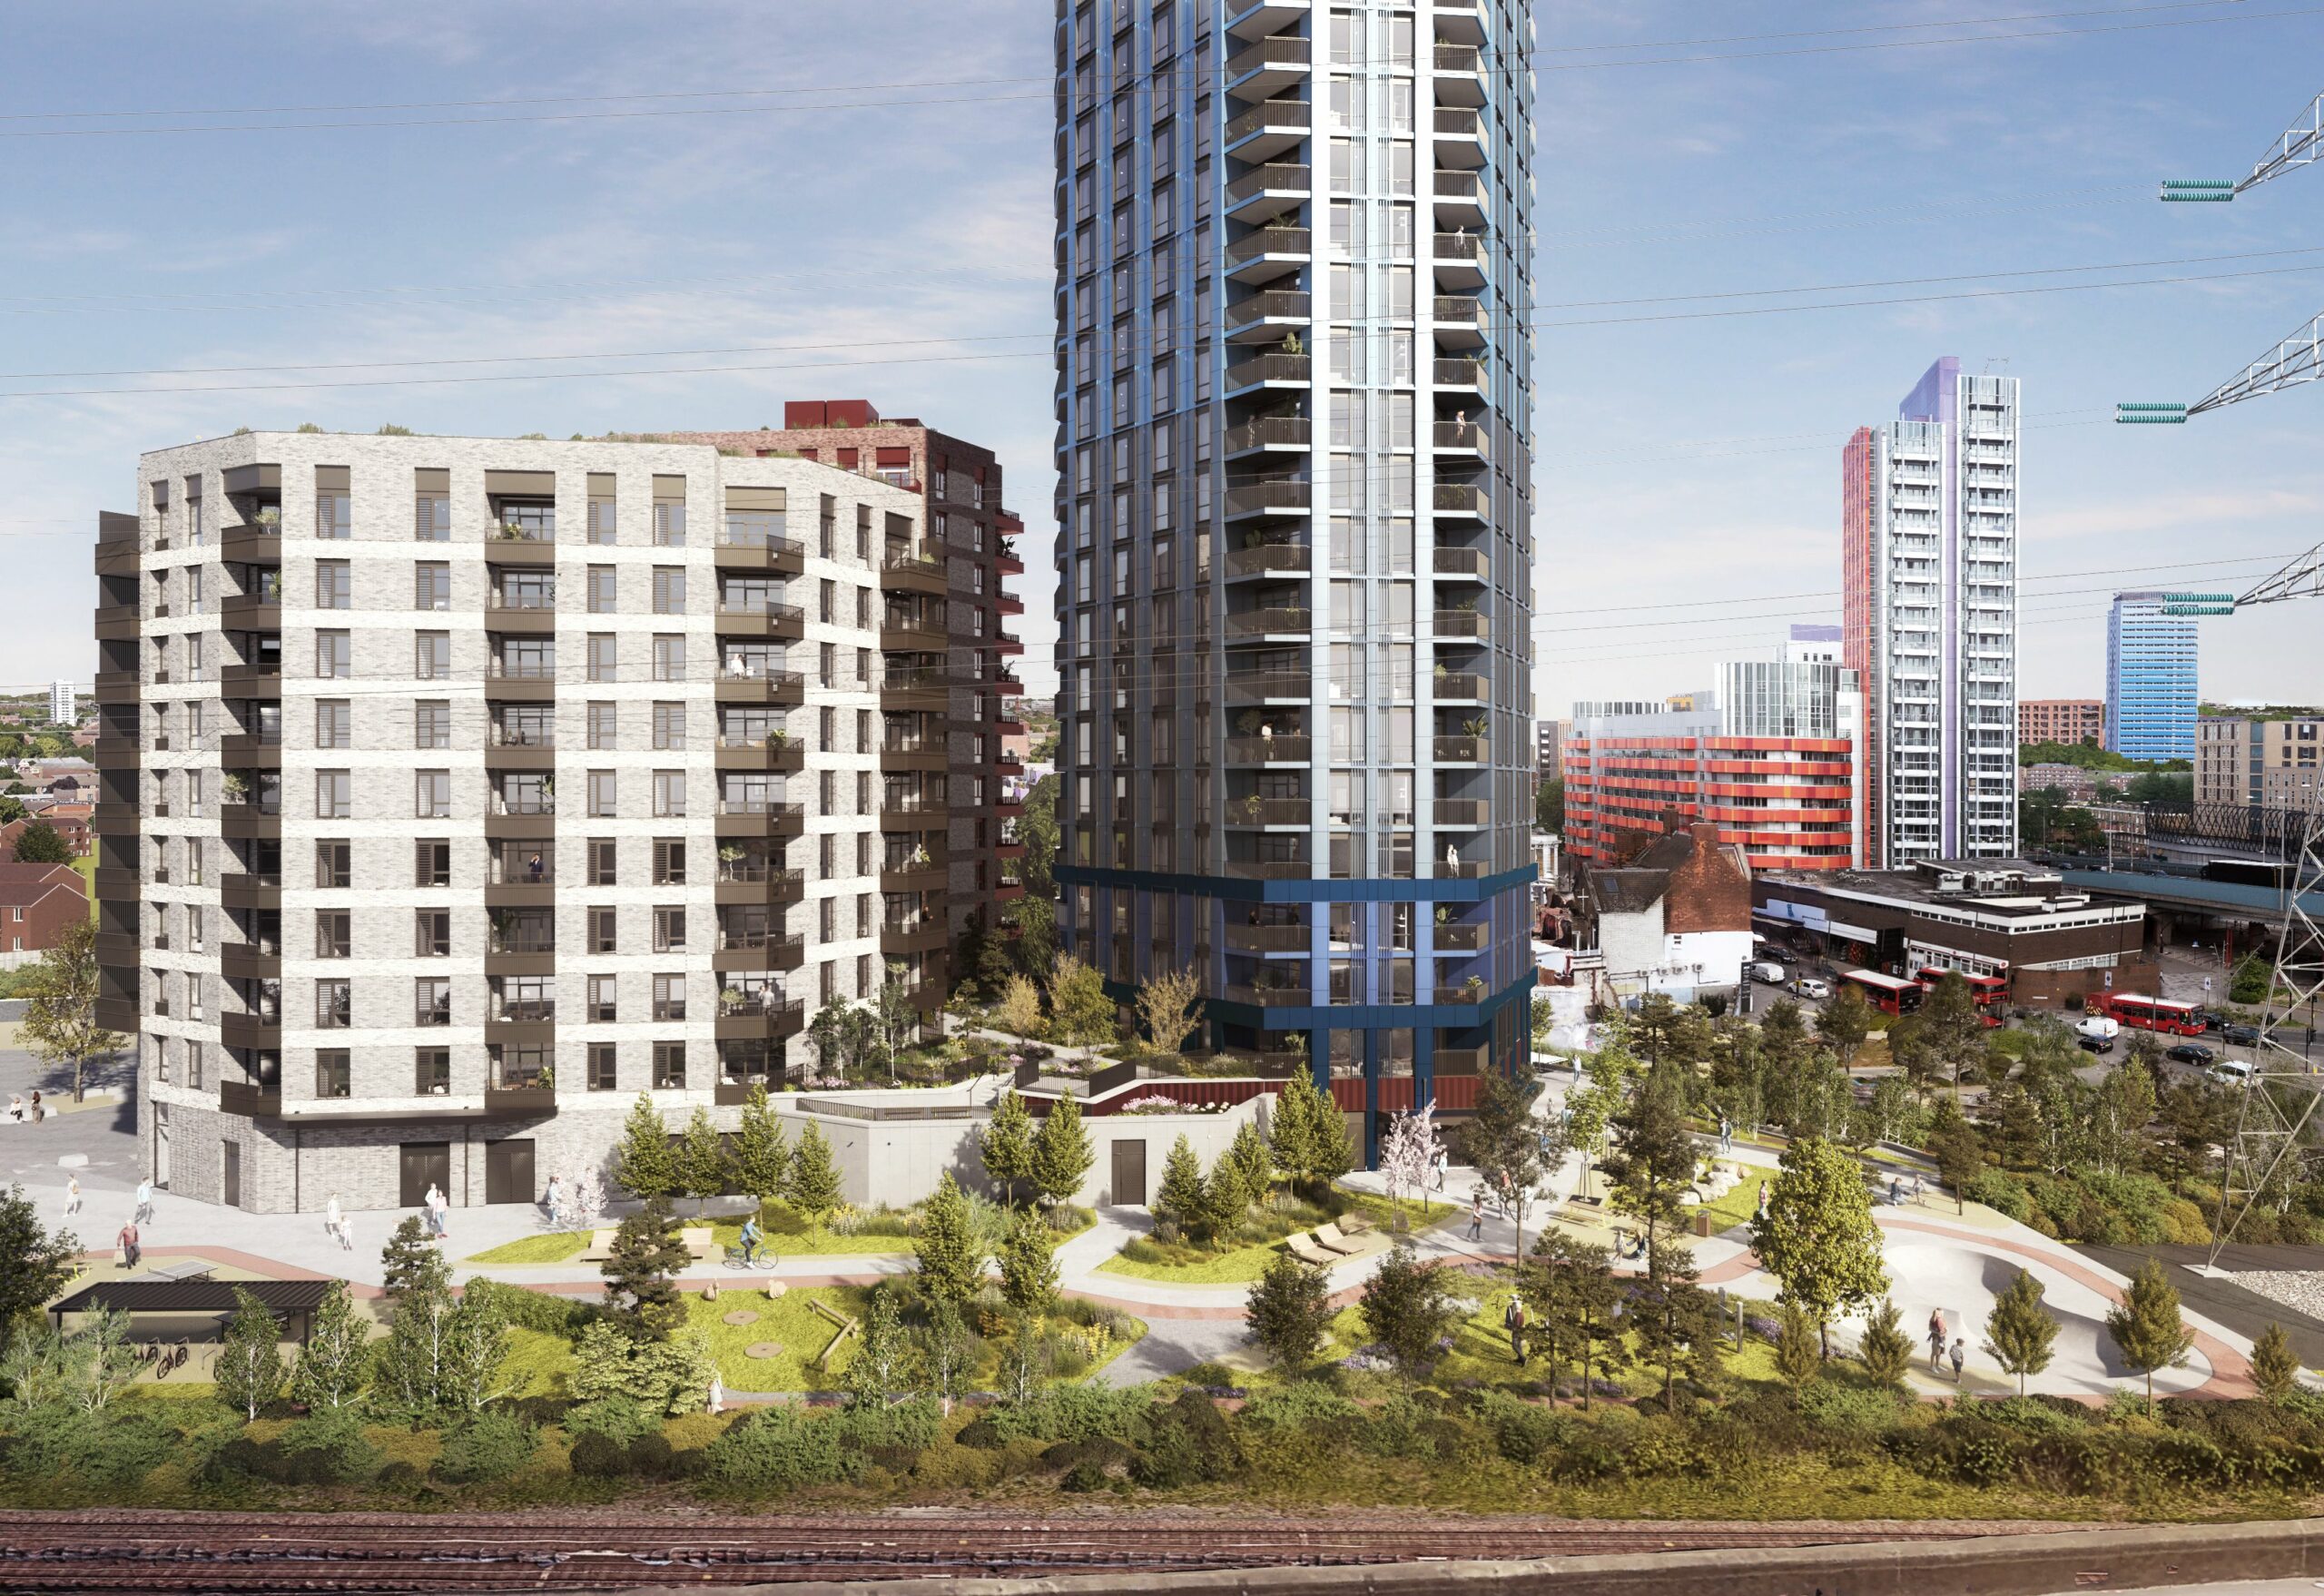 Exterior cgi site view 3d canning town